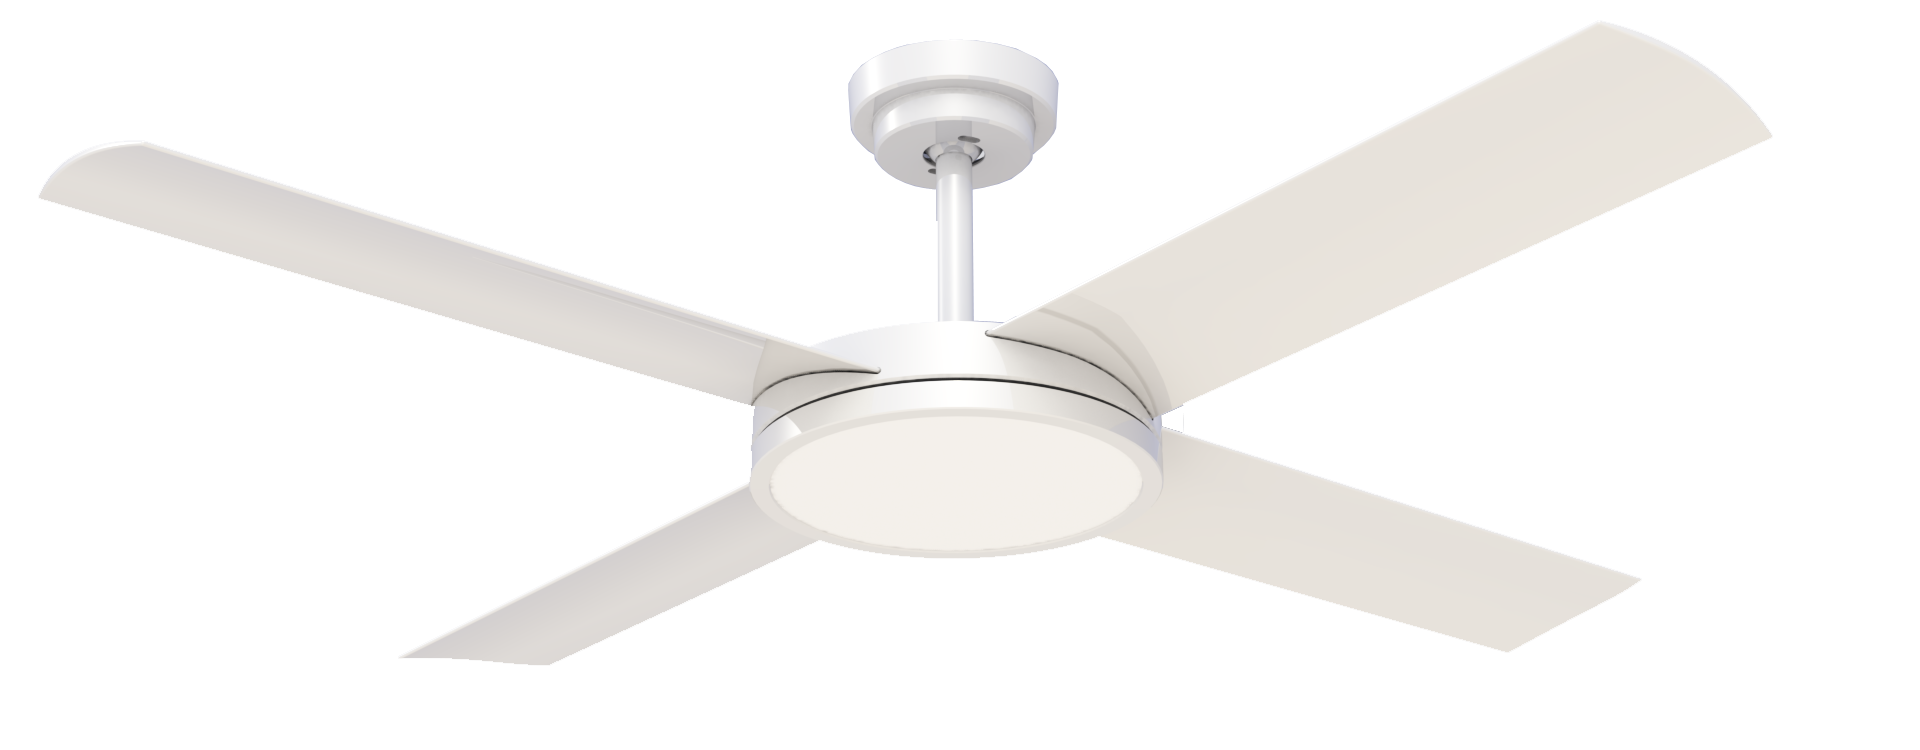 Revolution 3 with 24W LED Light (Dimmable) 52” Ceiling Fan - White